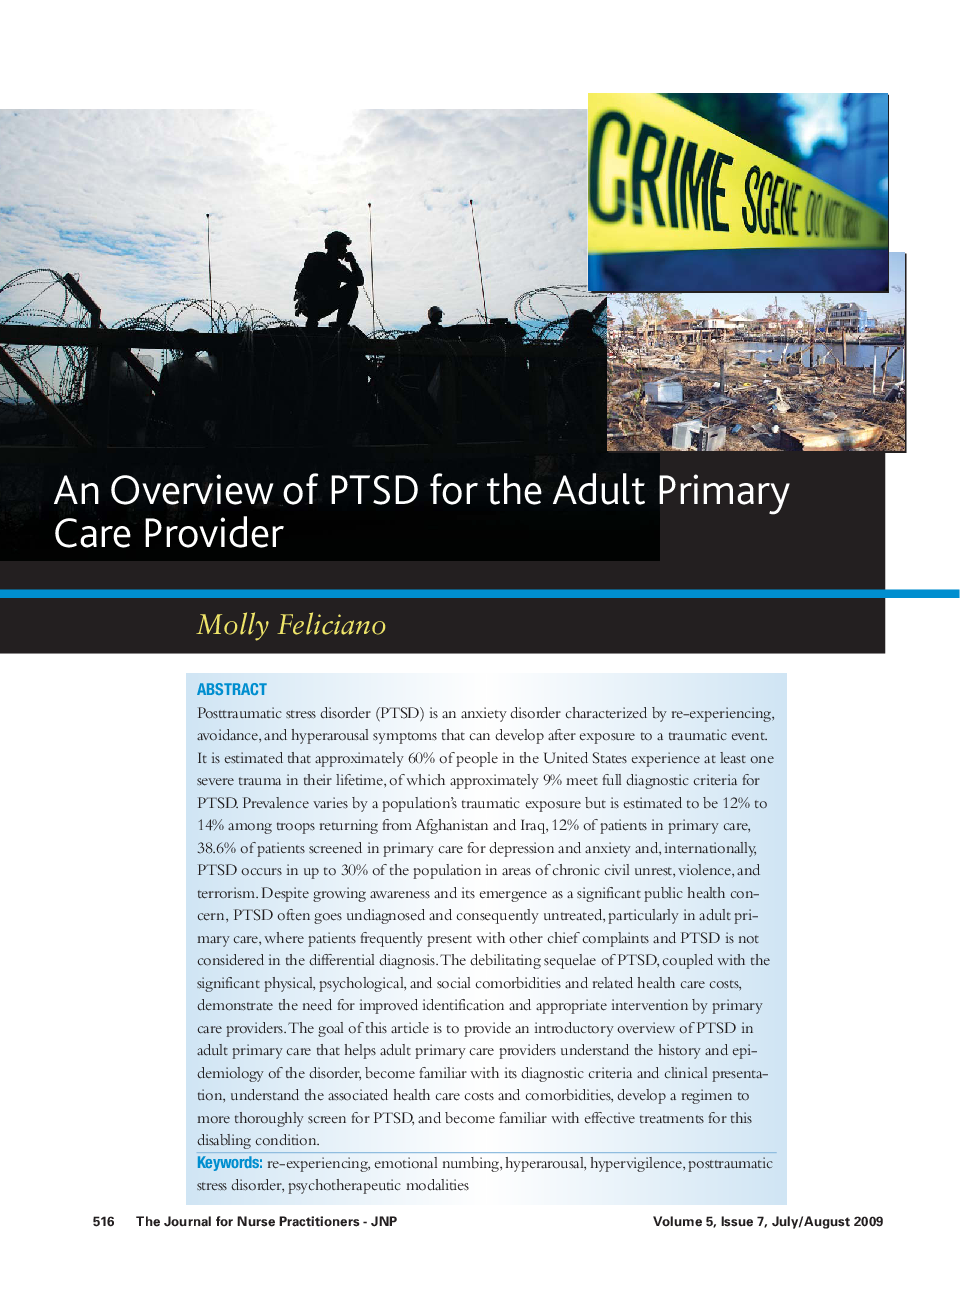 An Overview of PTSD for the Adult Primary Care Provider 